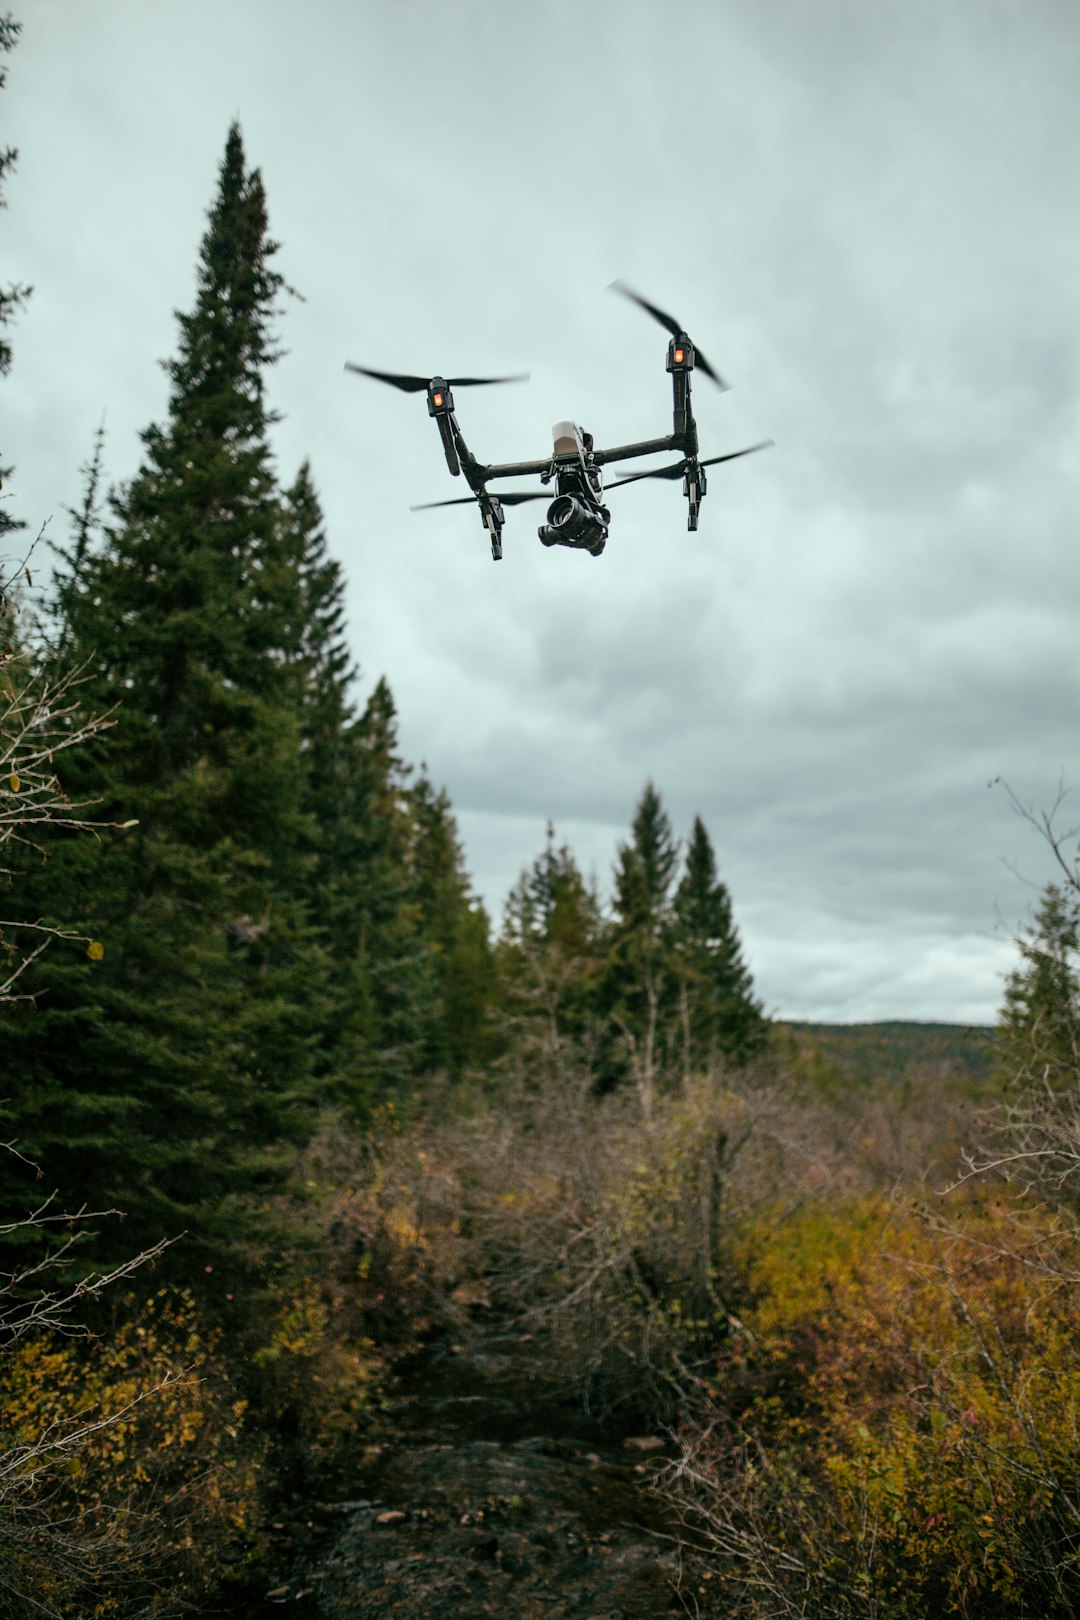 Drone near a forest